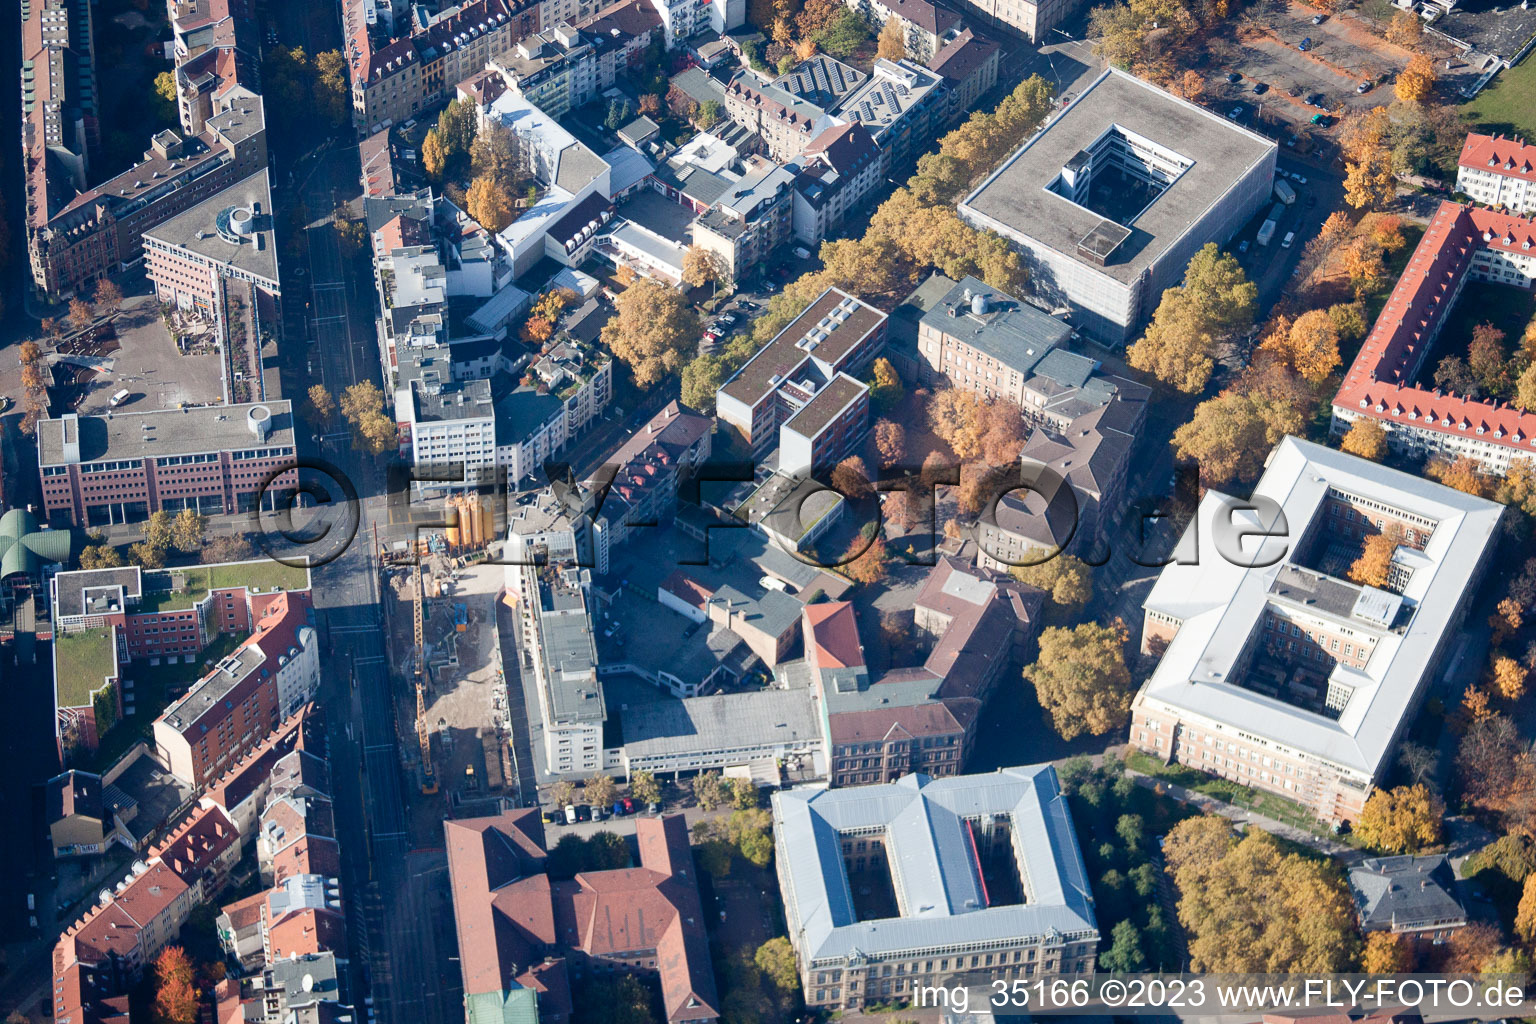 Aerial photograpy of KIT University in the district Innenstadt-Ost in Karlsruhe in the state Baden-Wuerttemberg, Germany